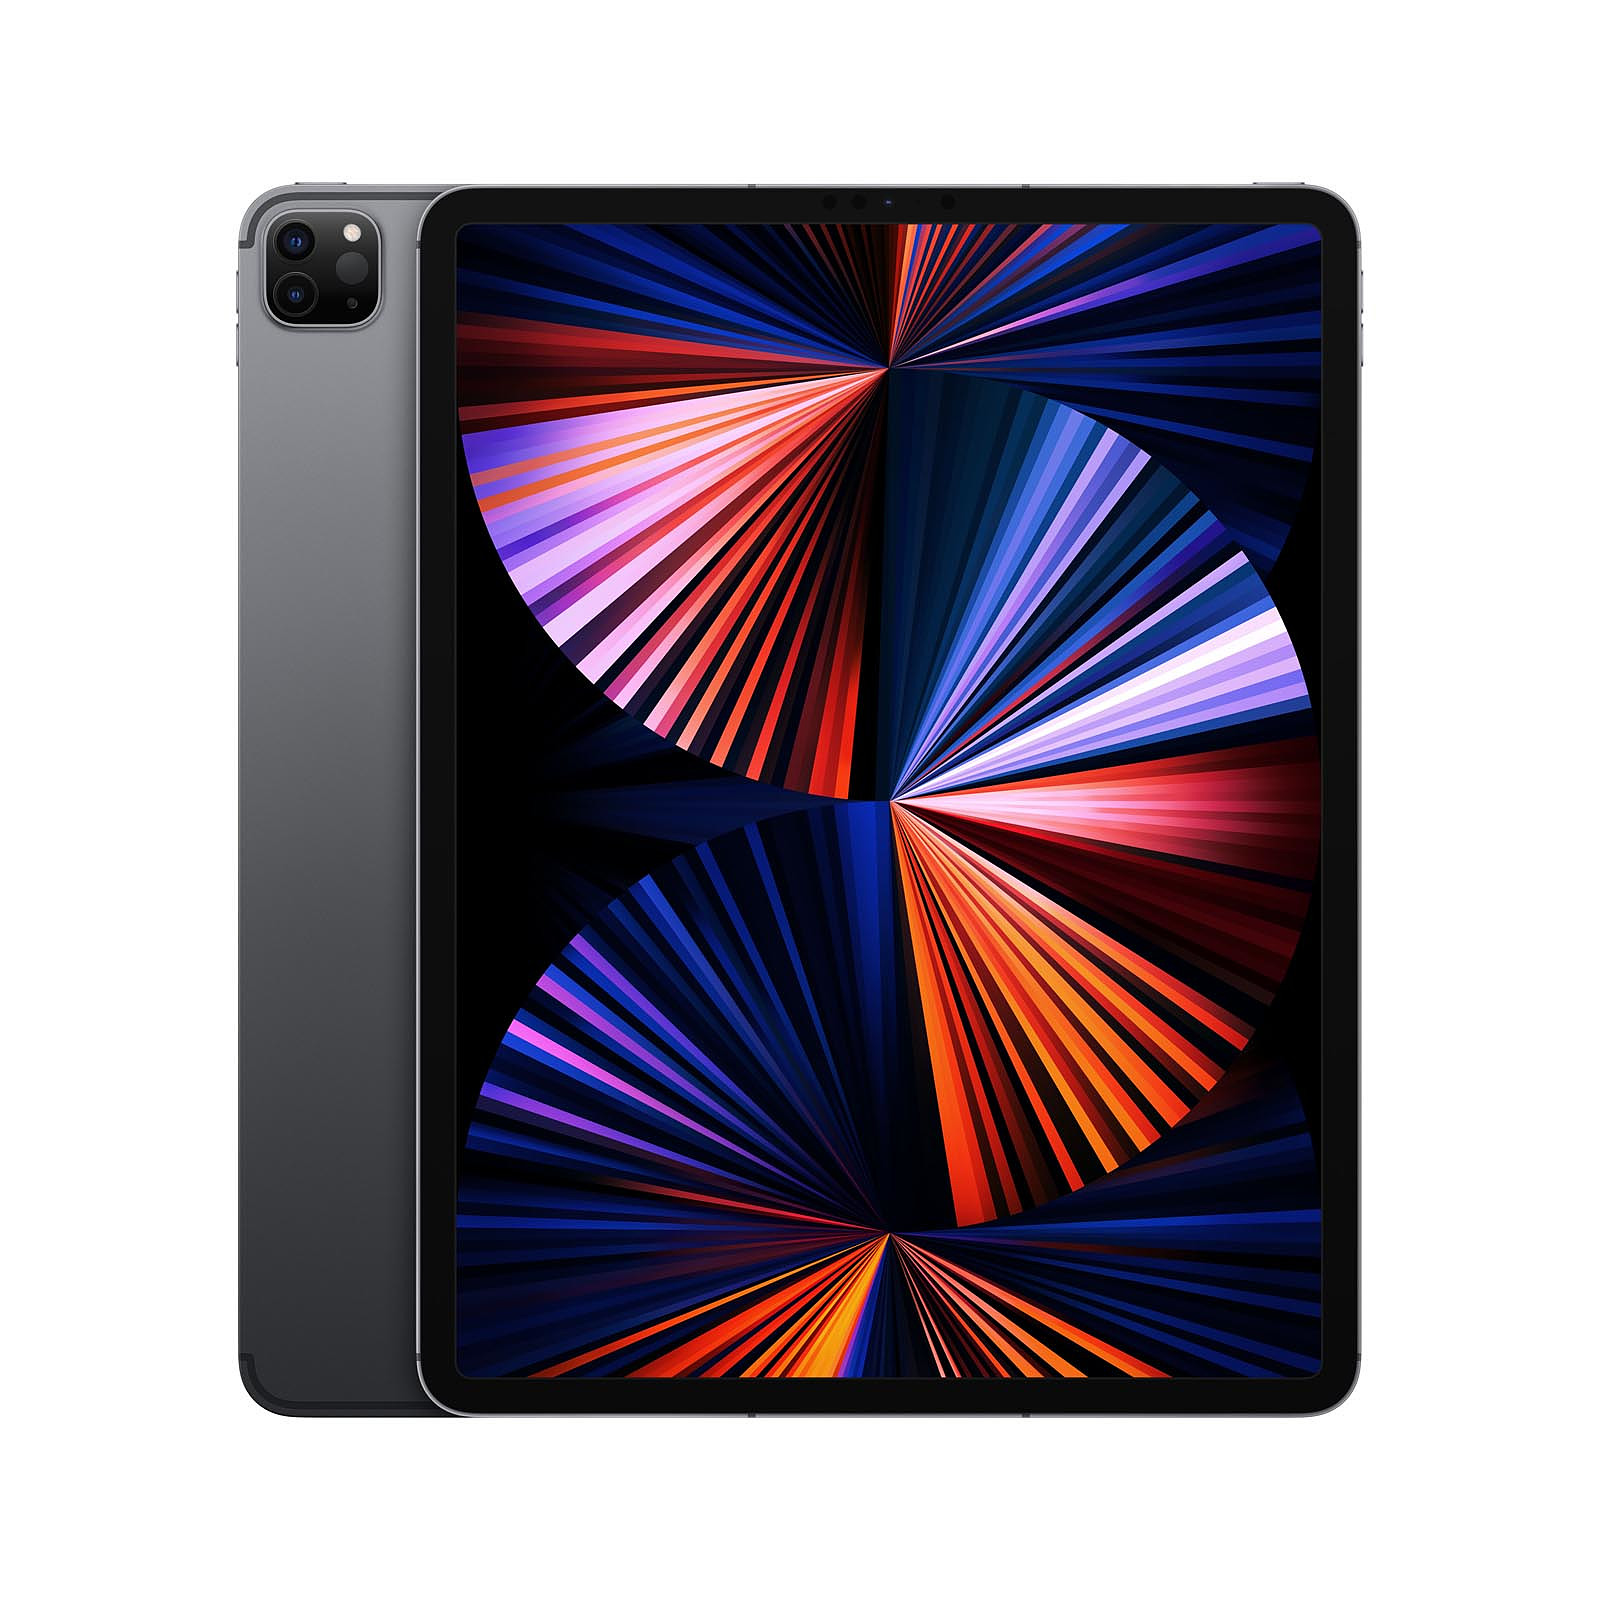 Apple iPad Pro (2021) 12.9 pouces 1 To Wi-Fi + Cellular Gris Sideral - Tablette tactile Apple